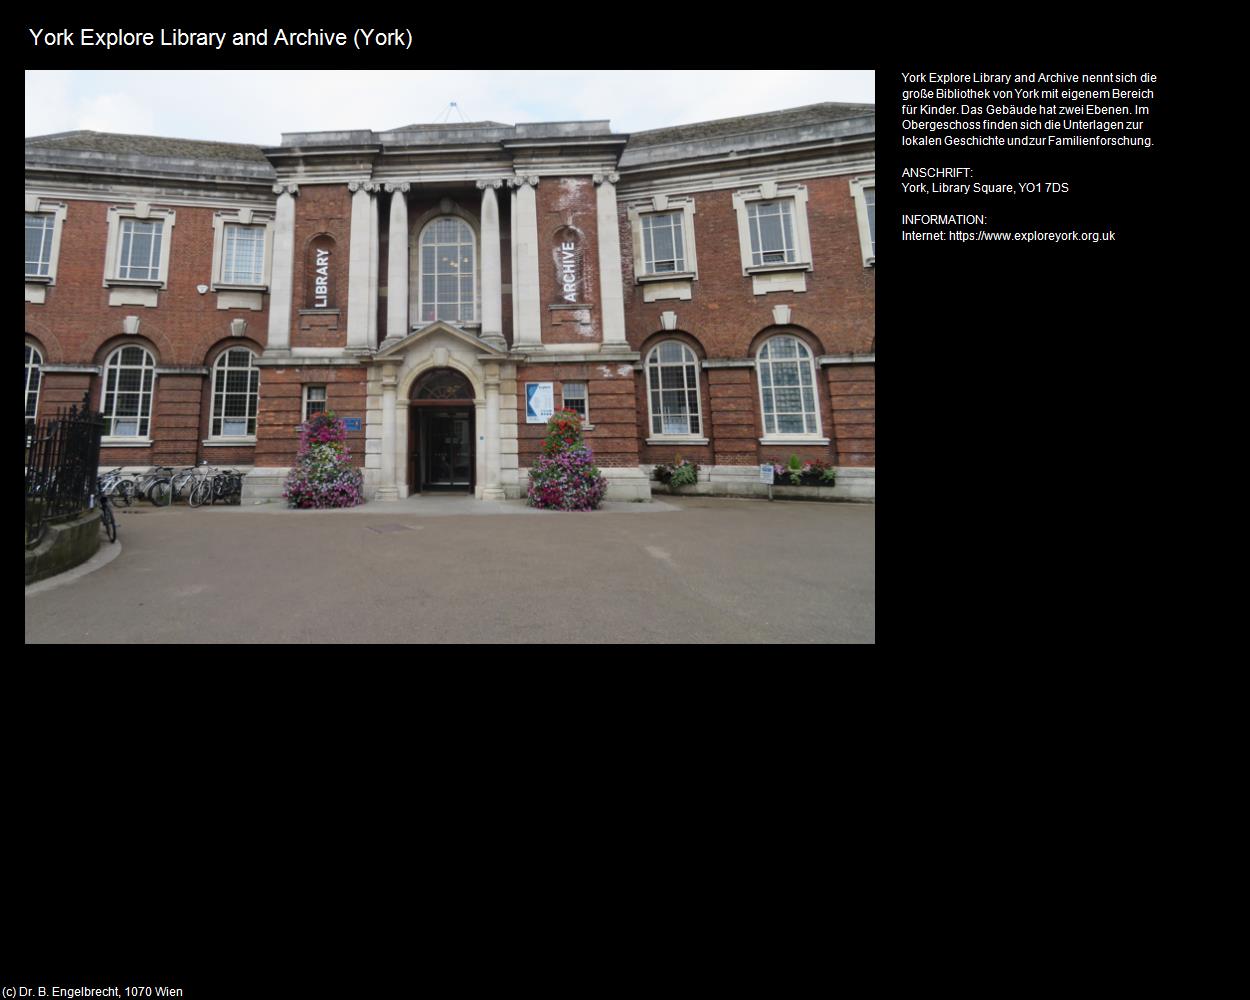 York Explore Library and Archive (York, England) in Kulturatlas-ENGLAND und WALES